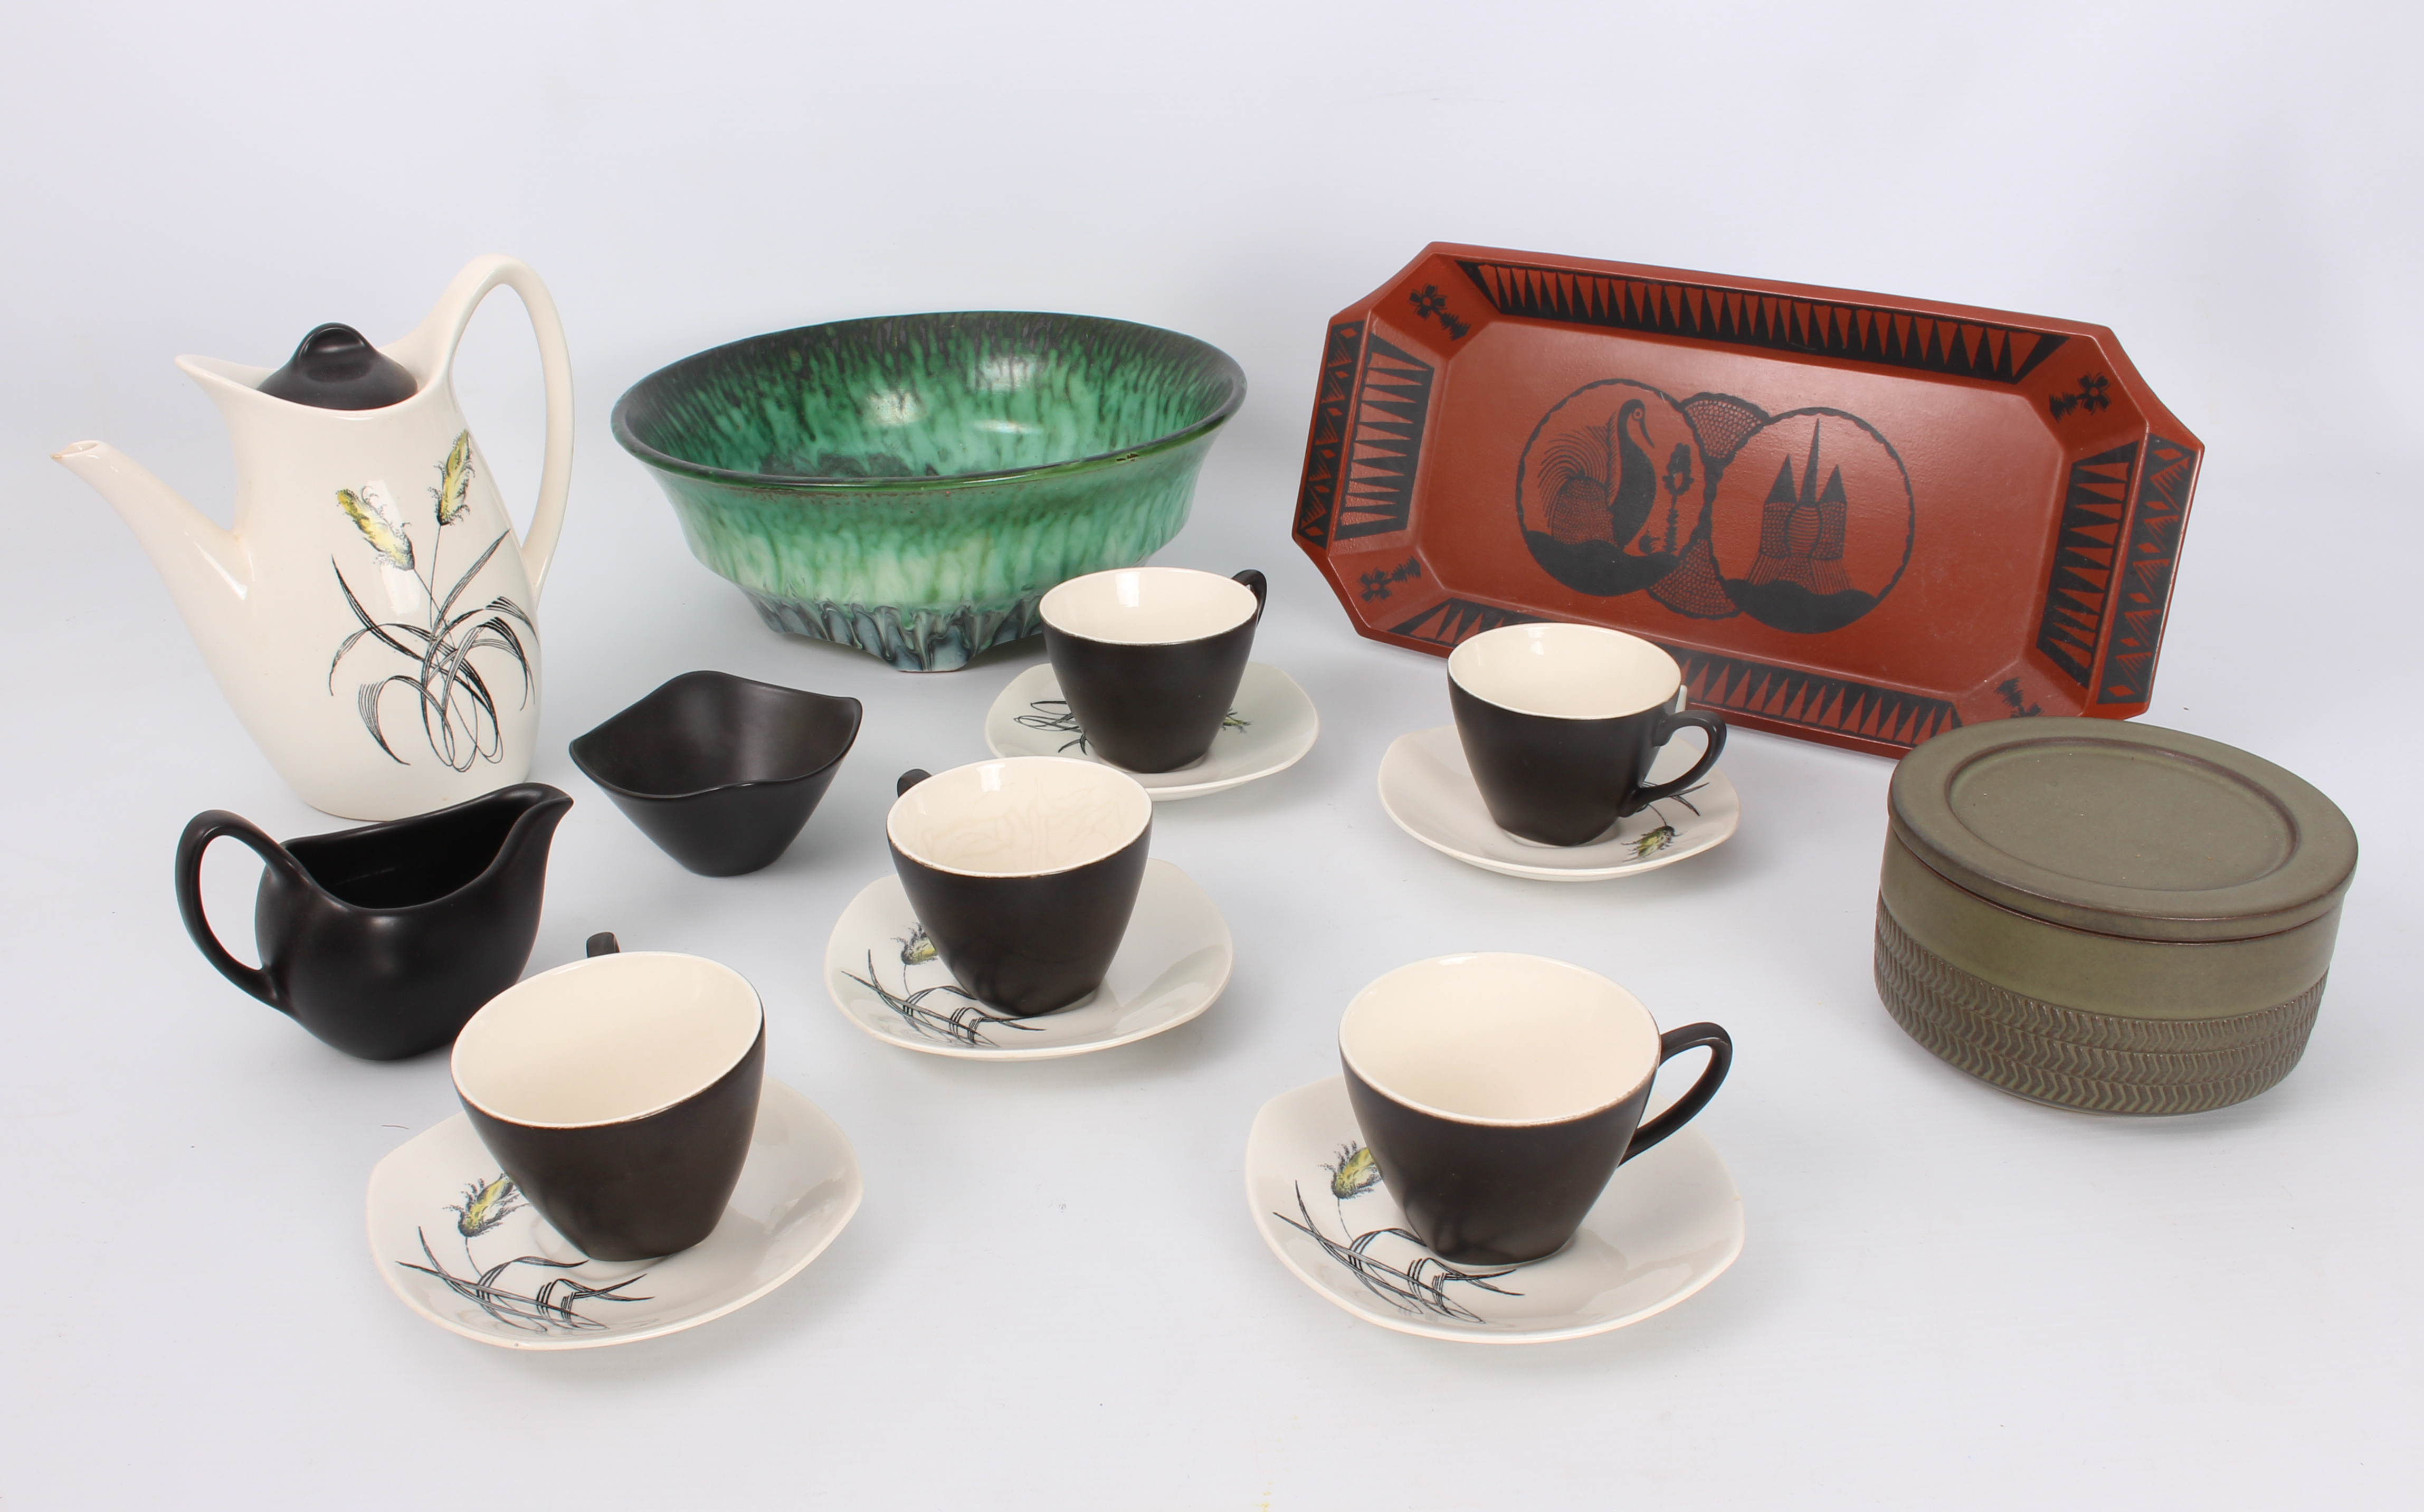 A group of retro 1960s-70s pottery - including a Swedish Upsala-Ekeby bowl in a marbled green glaze,